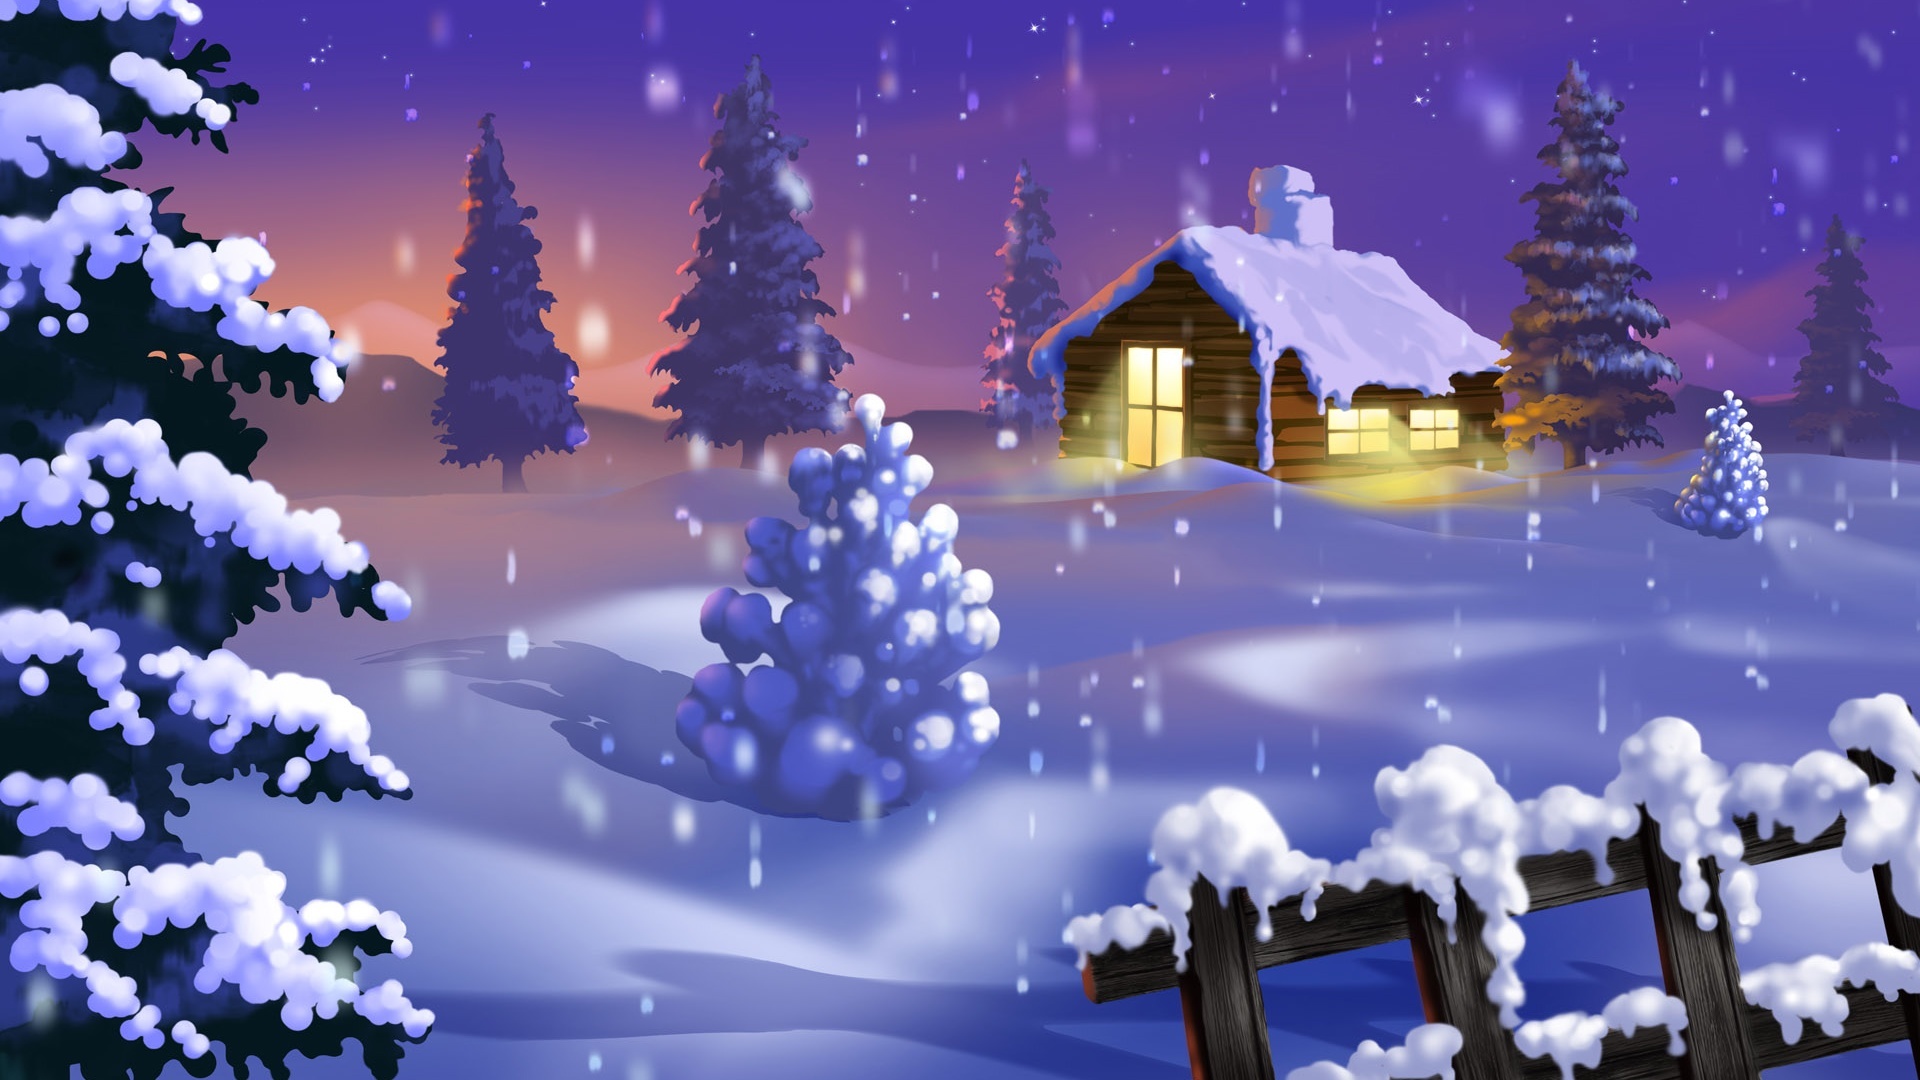 Windows Backgrounds christmas xmas, landscape, winter, new year, snow, fir trees, pictures, blue